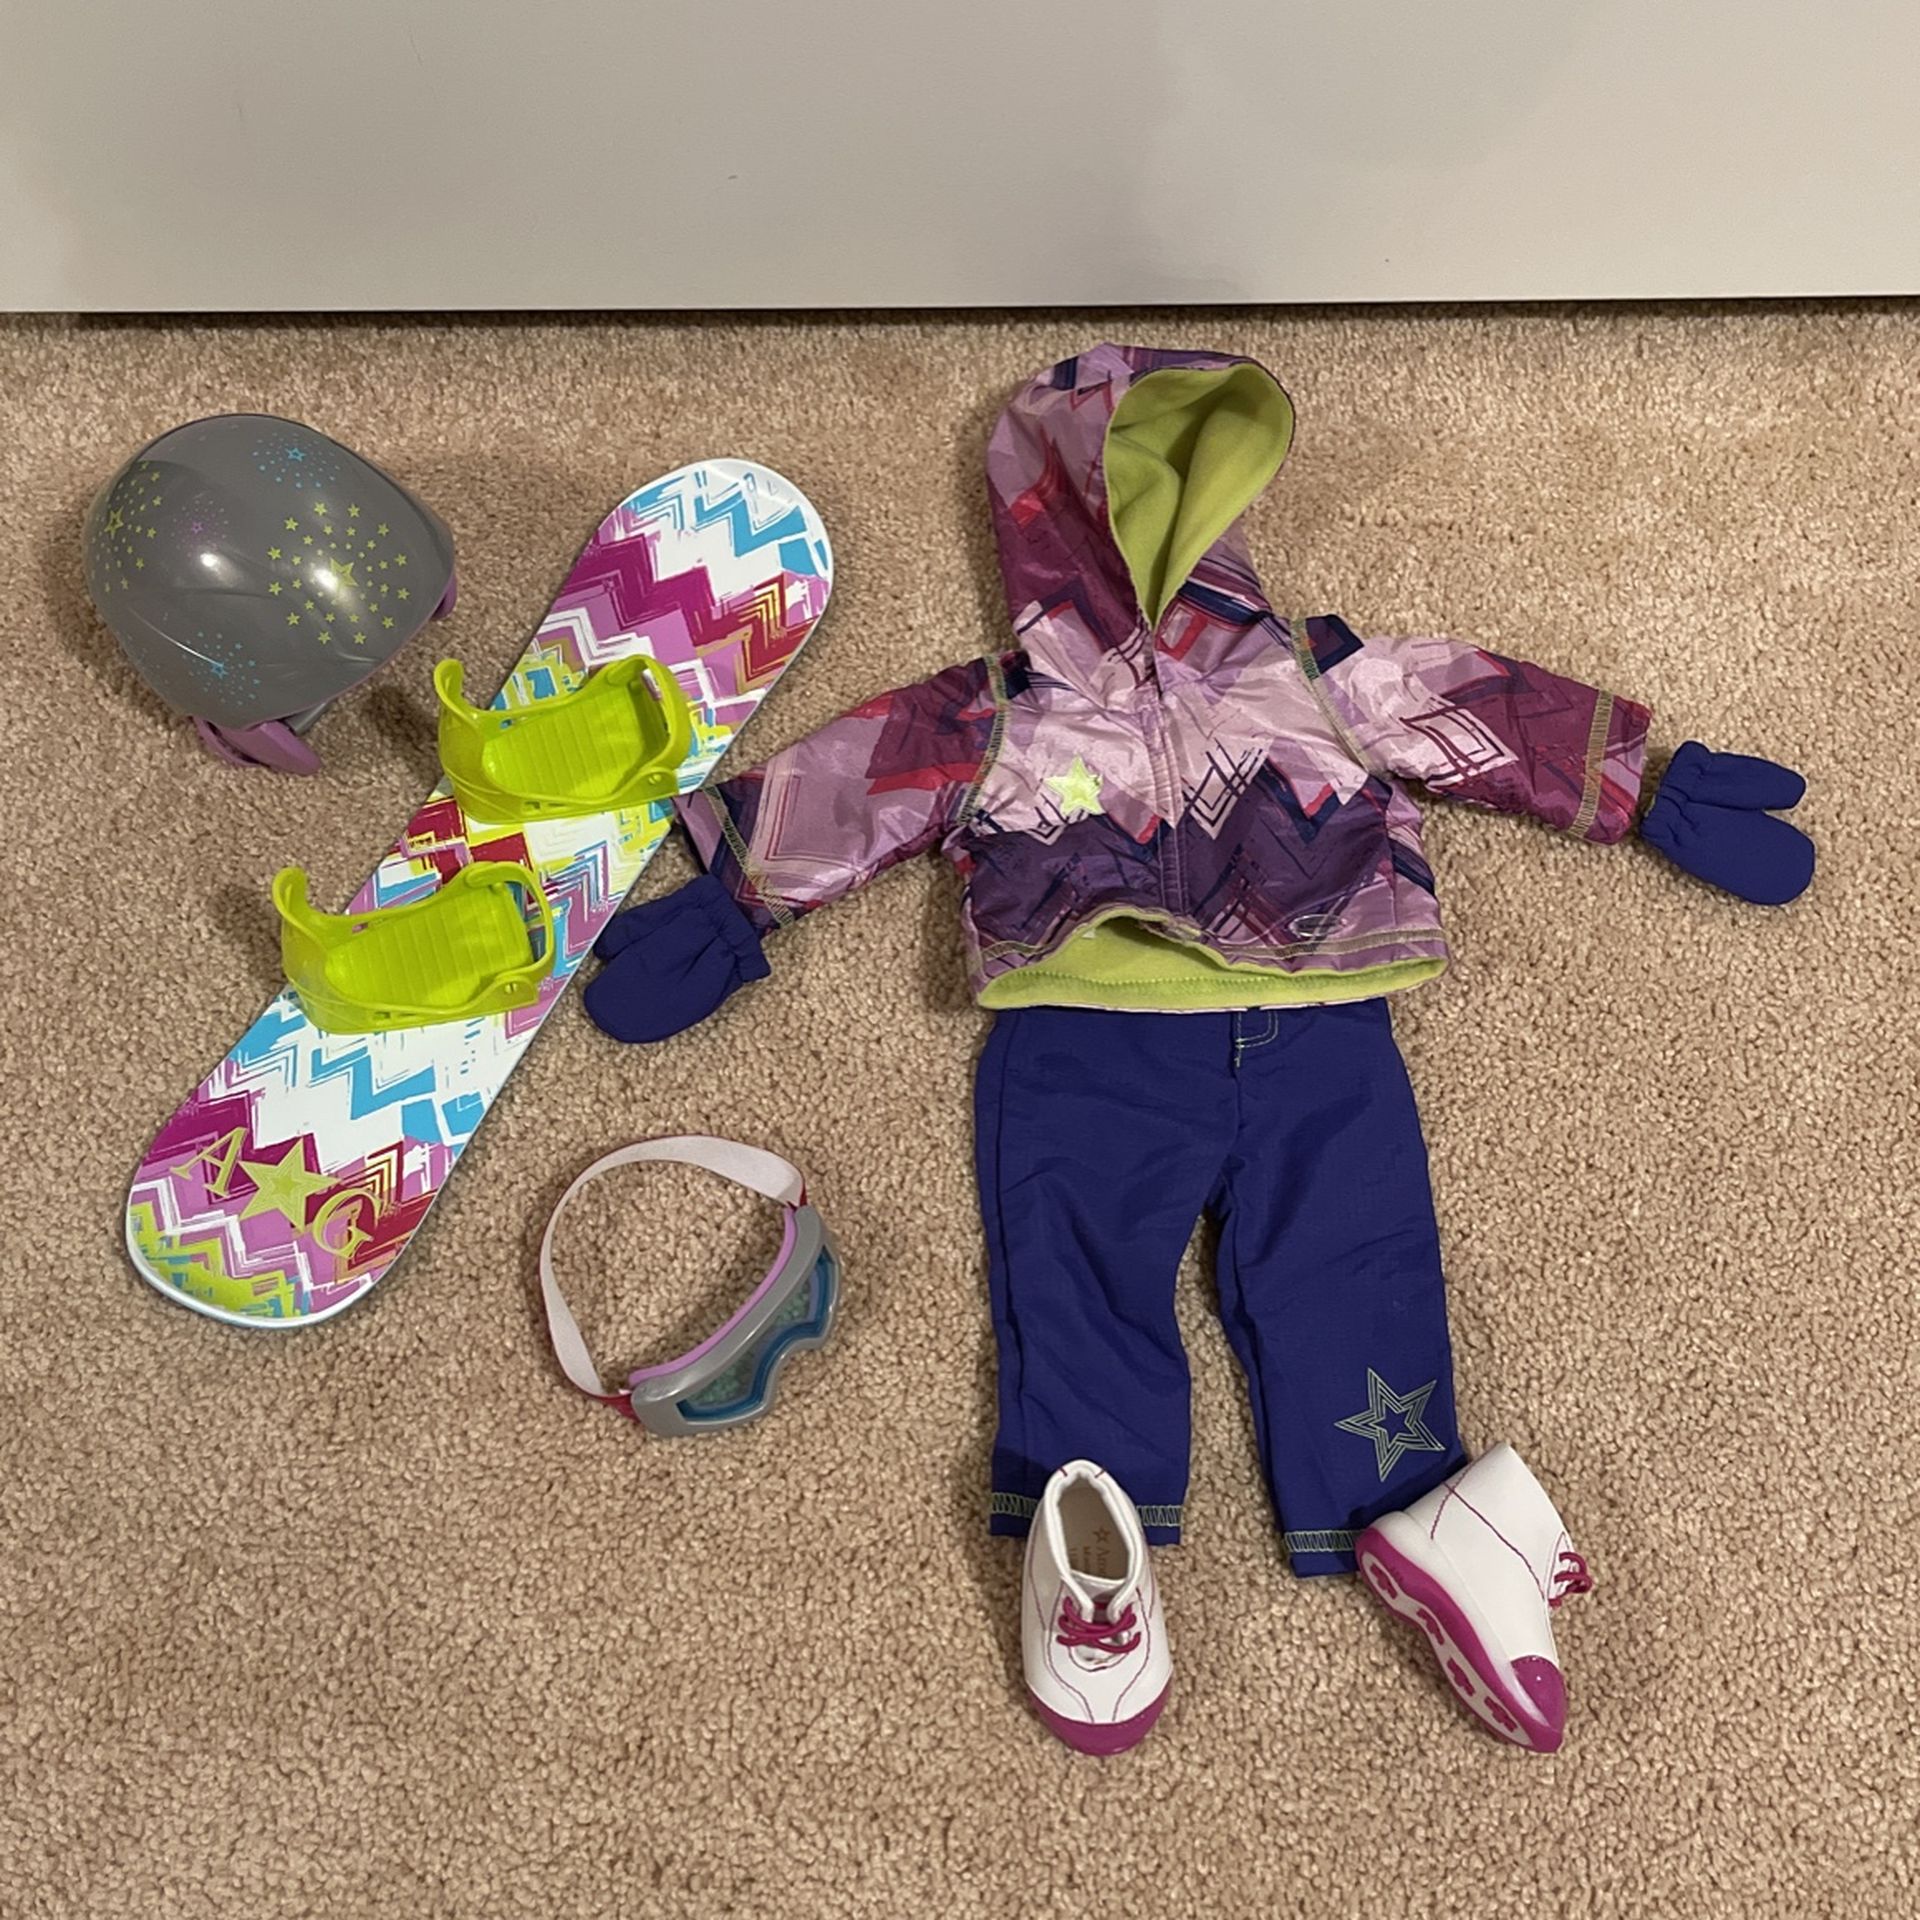 American Girl Snowboard, Helmet, And Snow Outfit